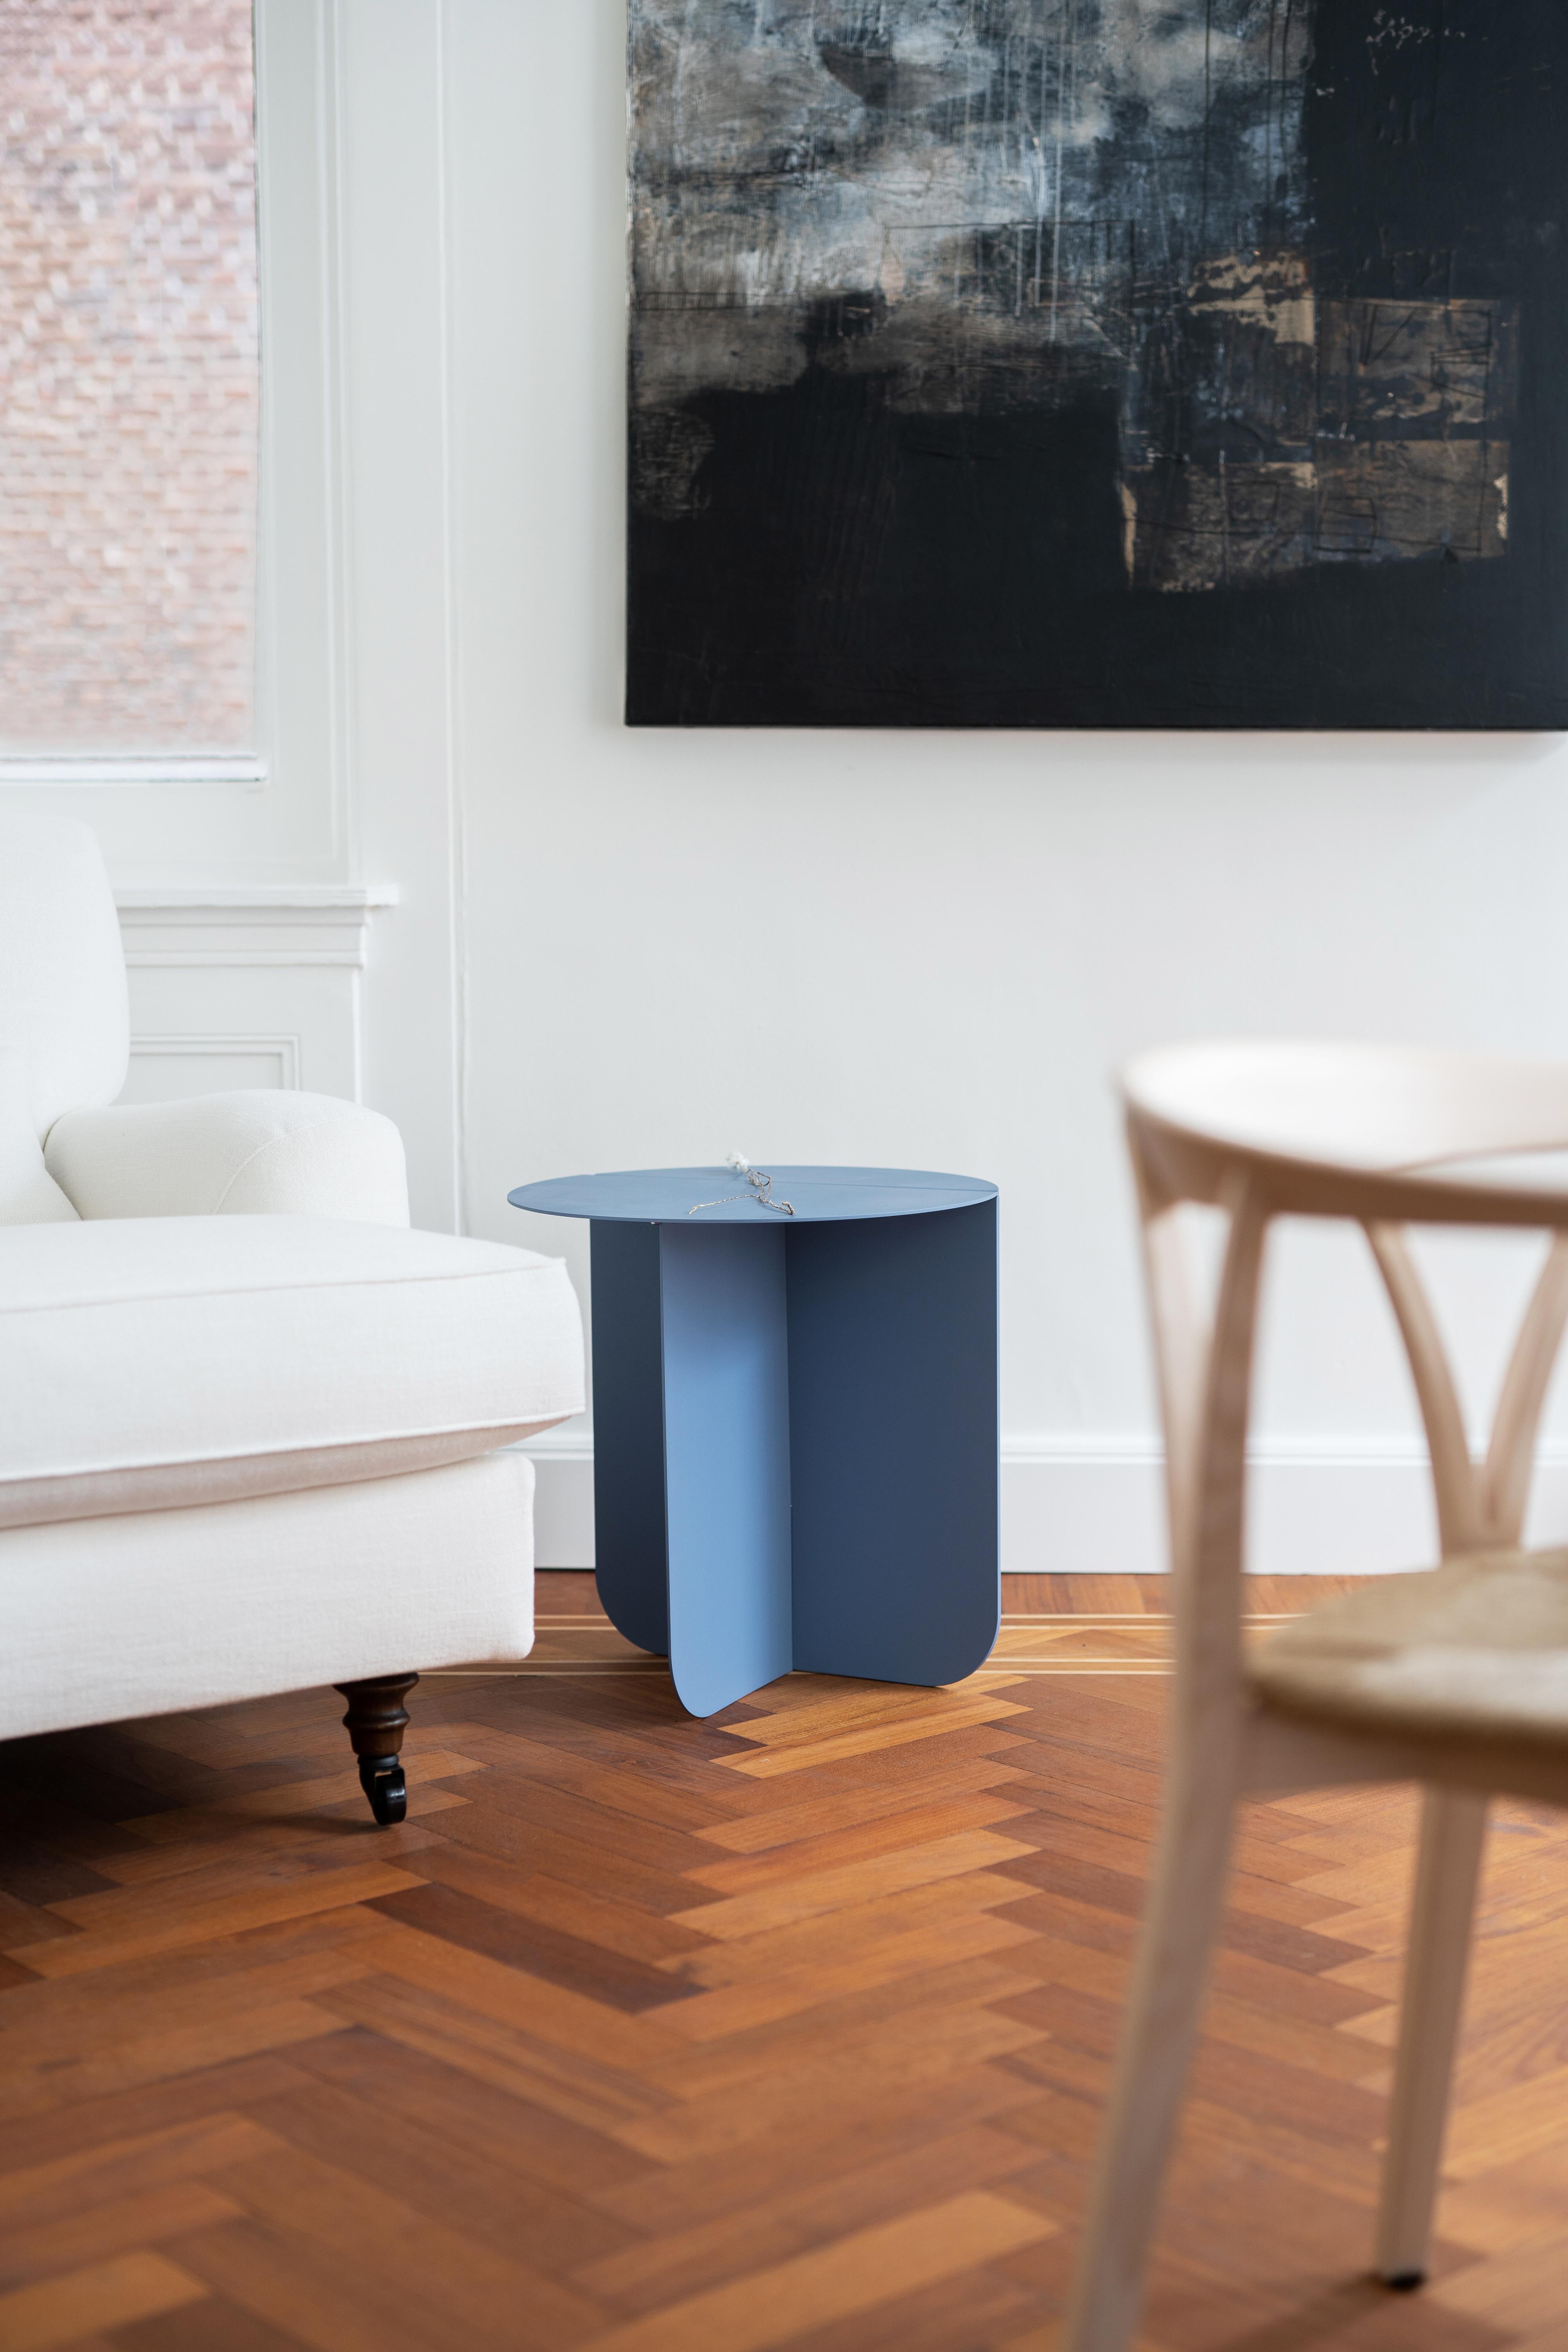 Powder-Coated Colour, a Modern Coffee / Side Table, Ral 1013 - Oyster White, by Bas Vellekoop For Sale